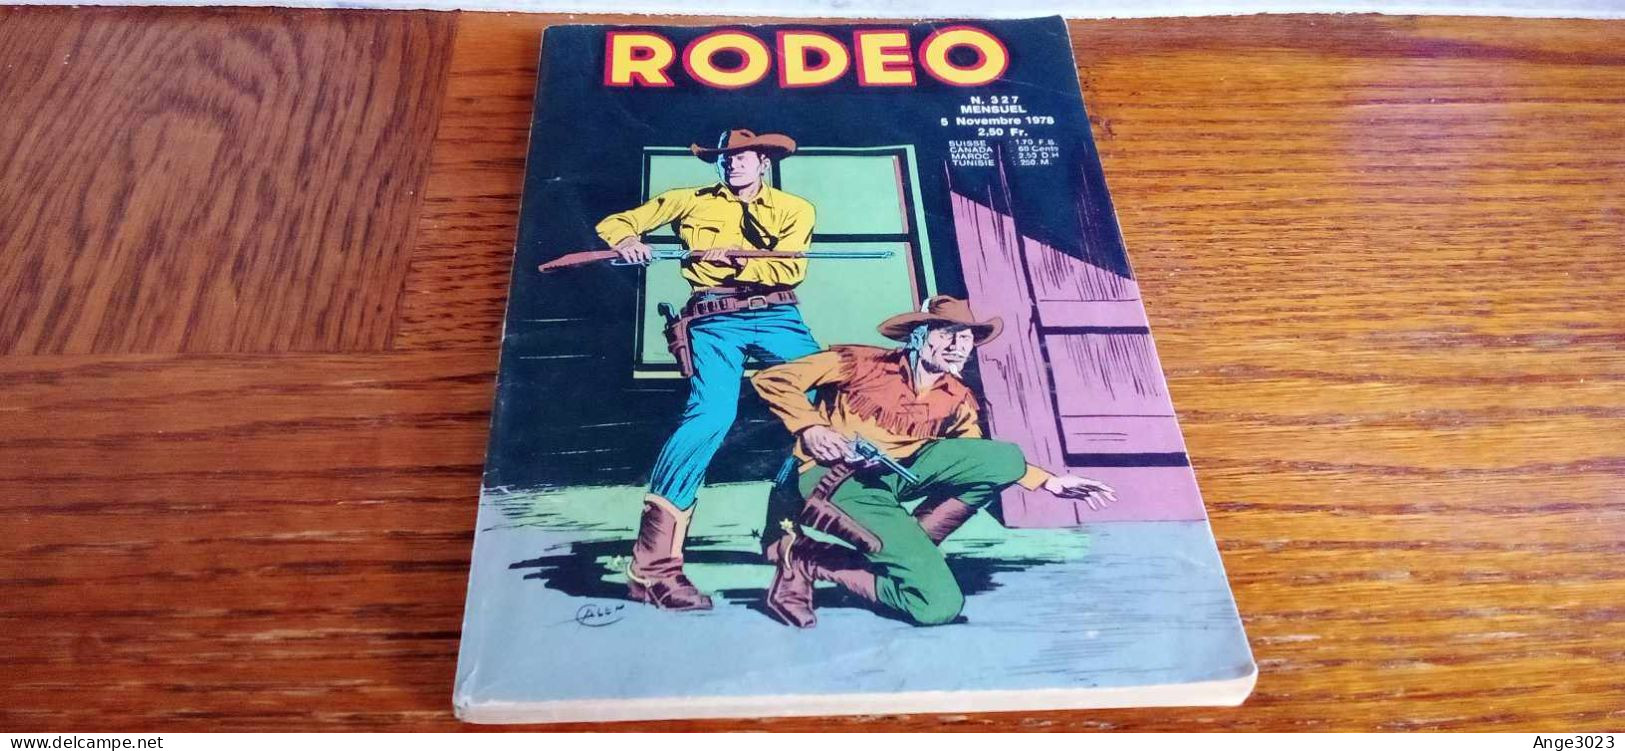 RODEO N°327 - Rodeo